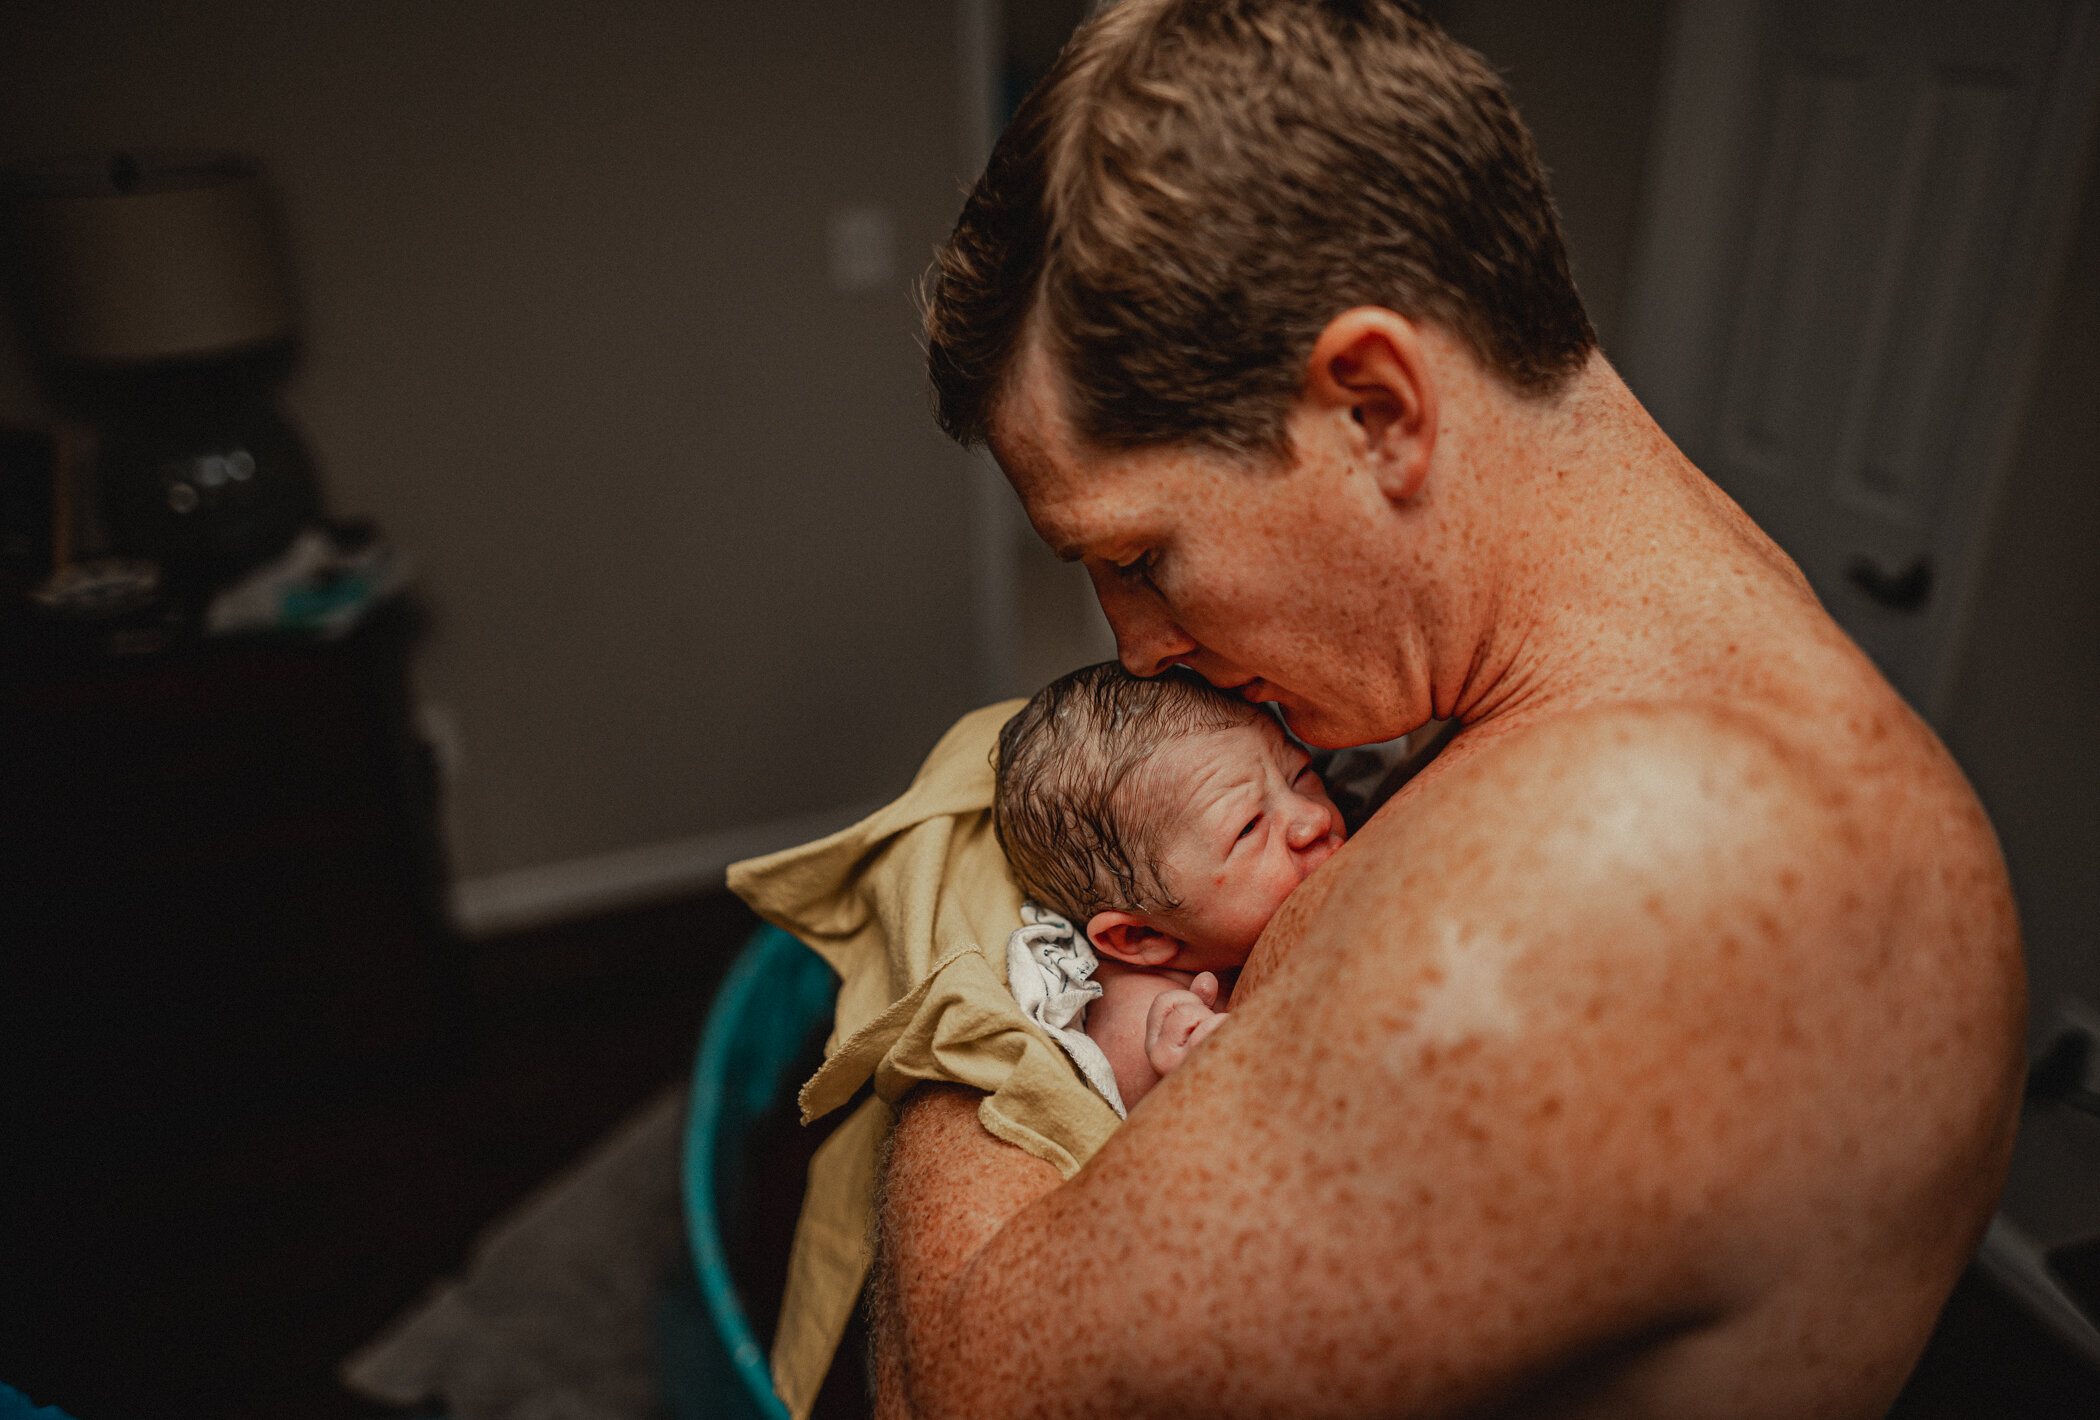 First skin-to-skin time with dad after a hime water birth with premier Birth Center midwives during COVD pandemic